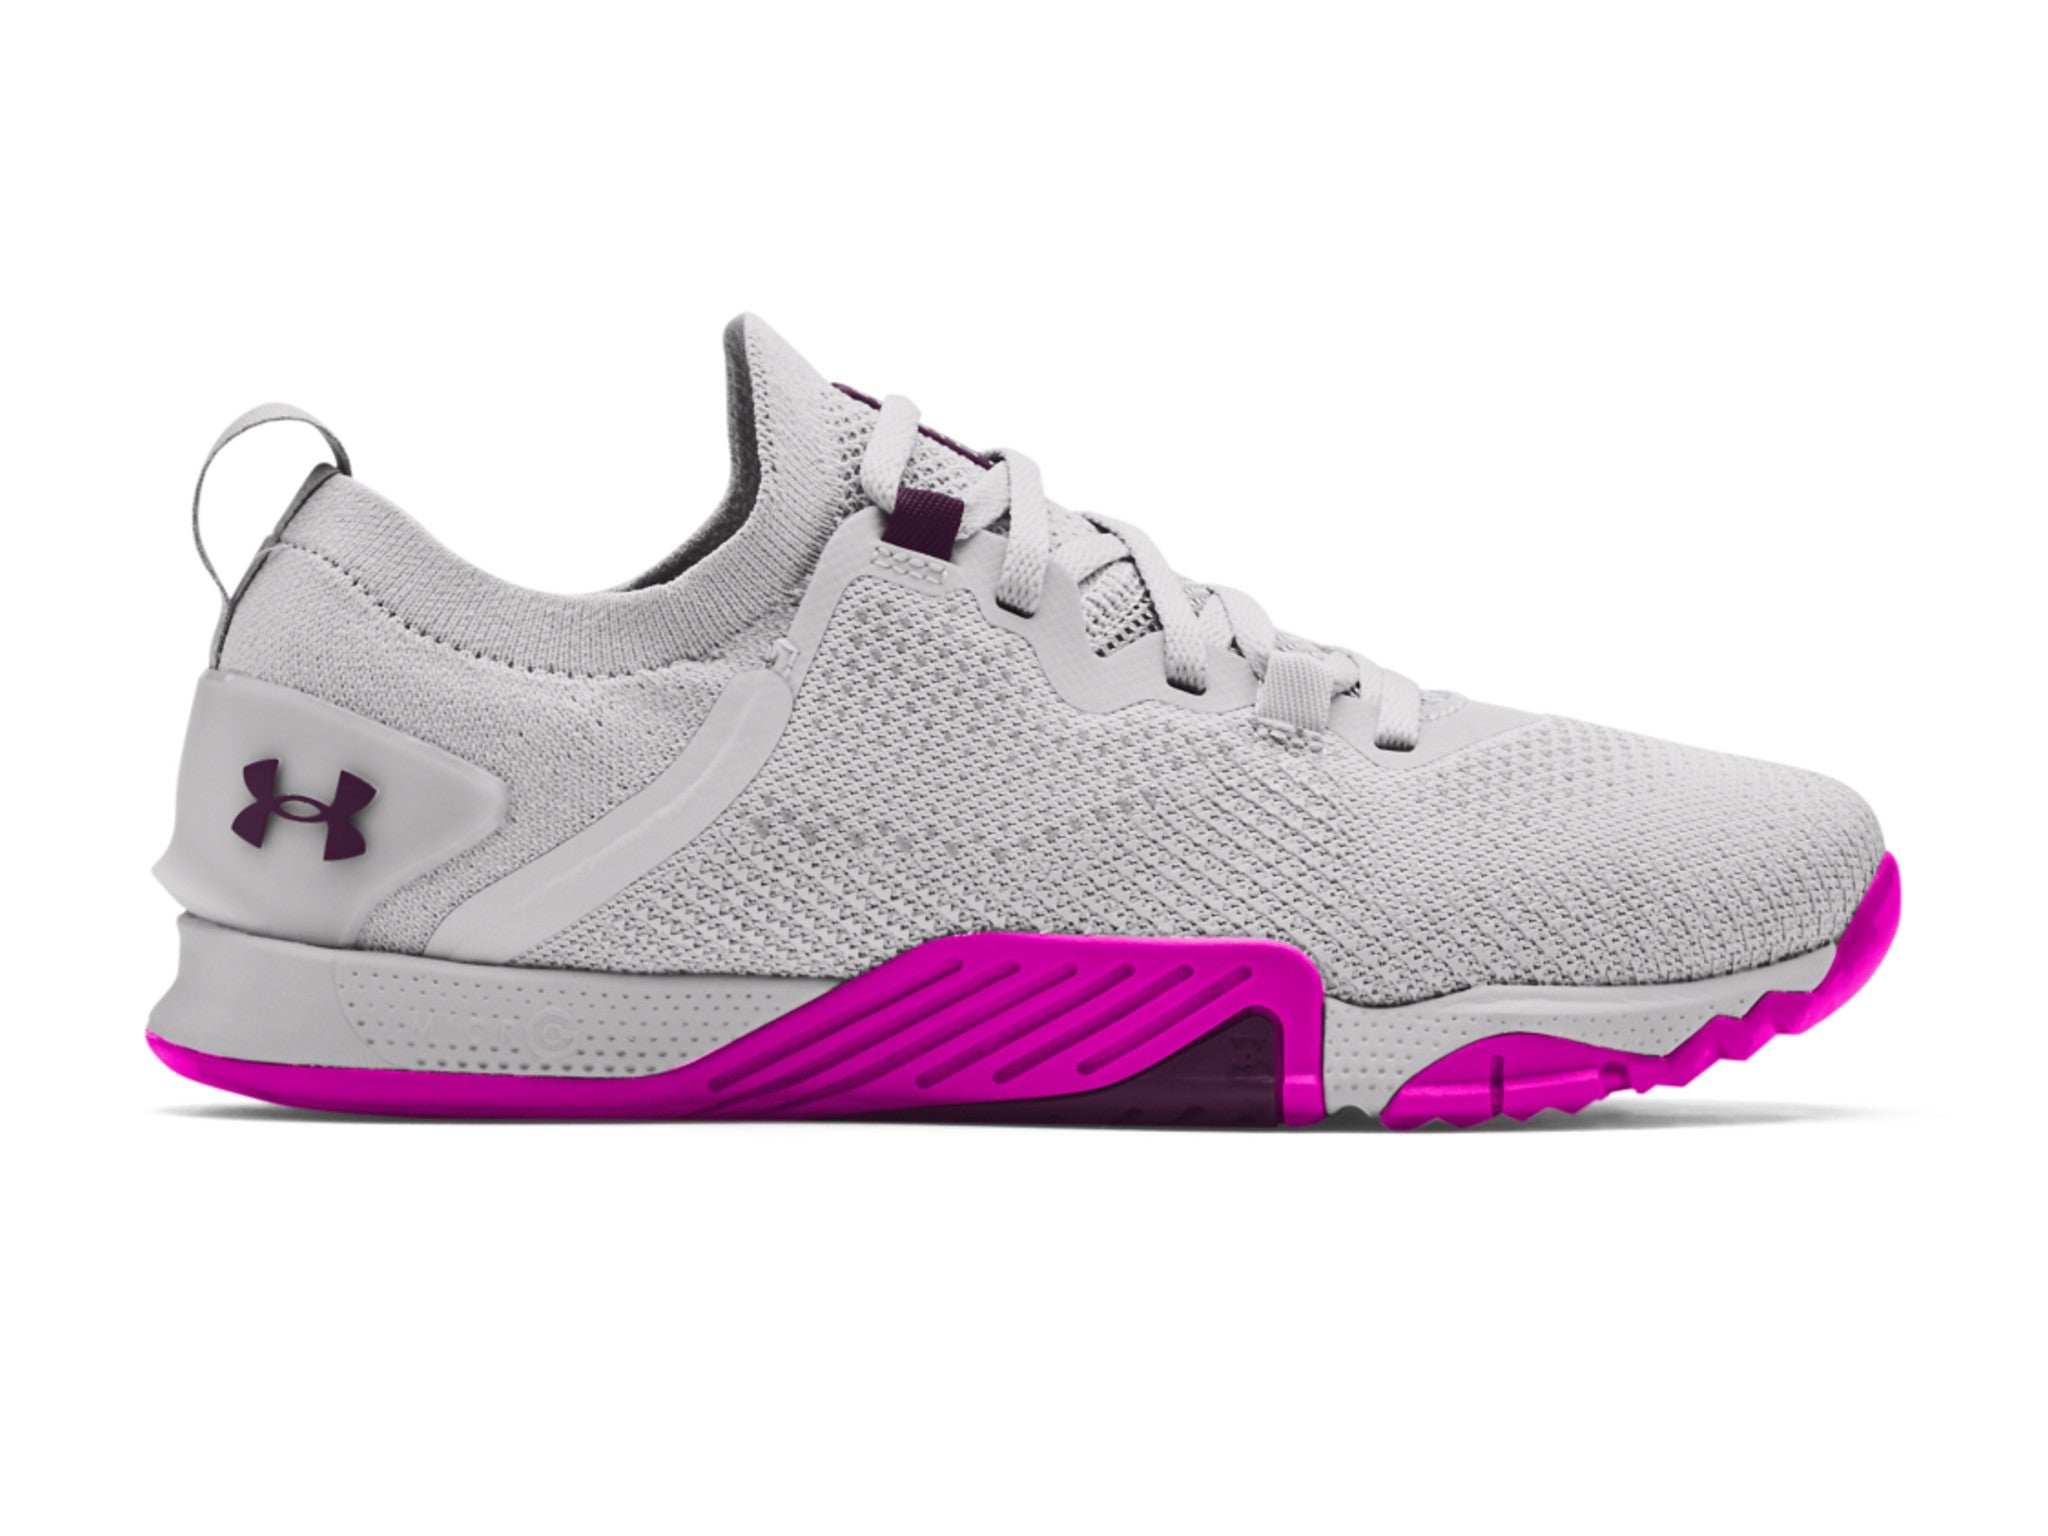 Under Armour women's TriBase reign 3 training shoes indybest.jpeg